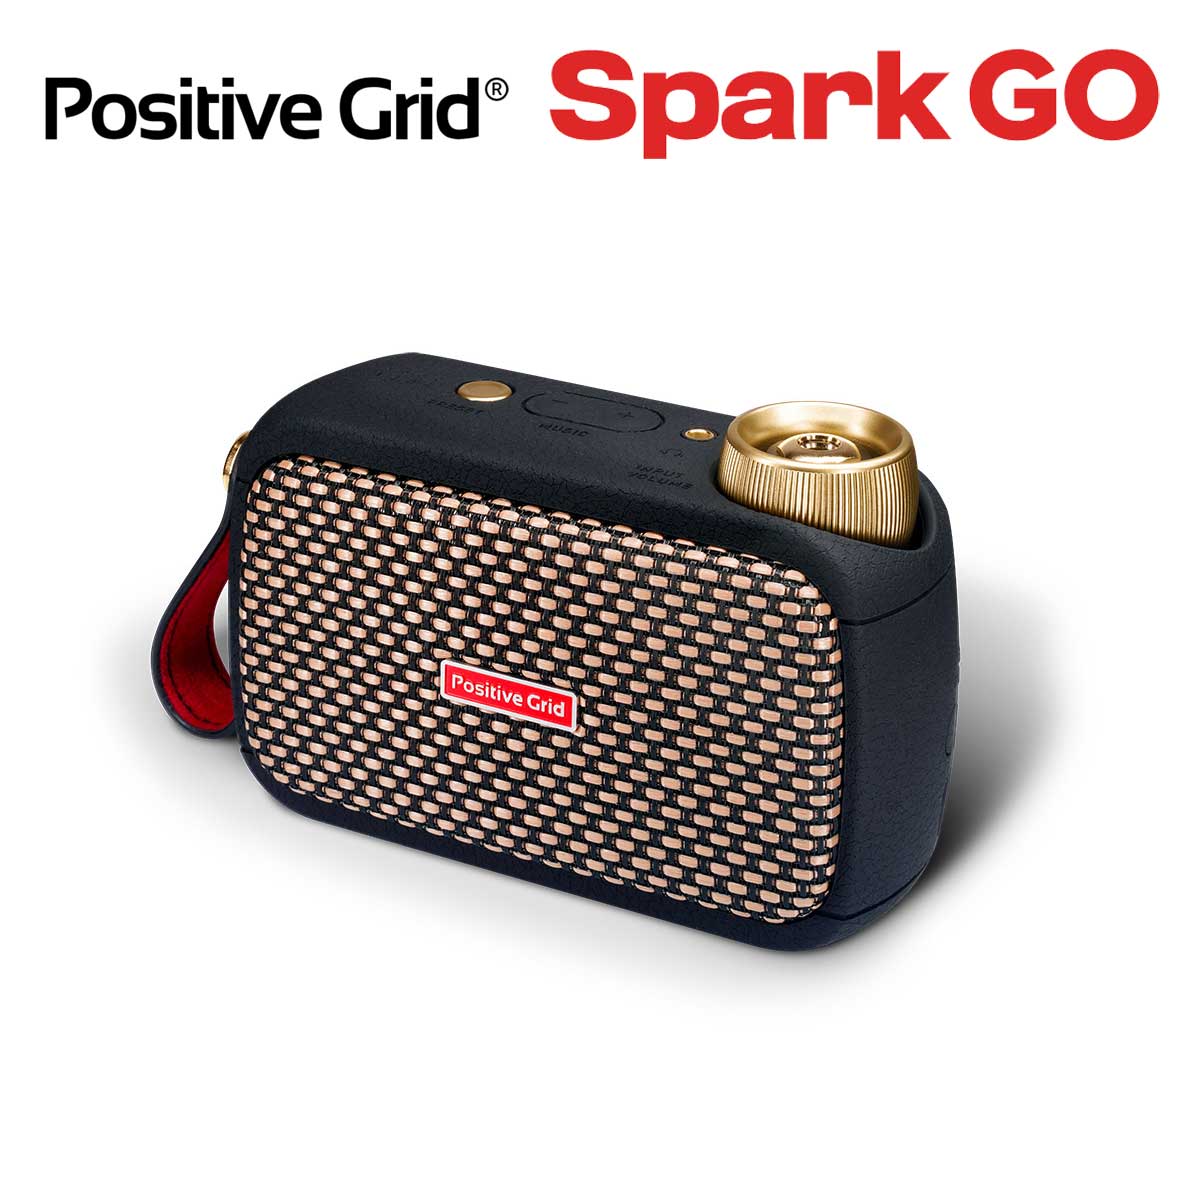 Positive Grid Spark Footswitch - Hands Free Tone Control! 